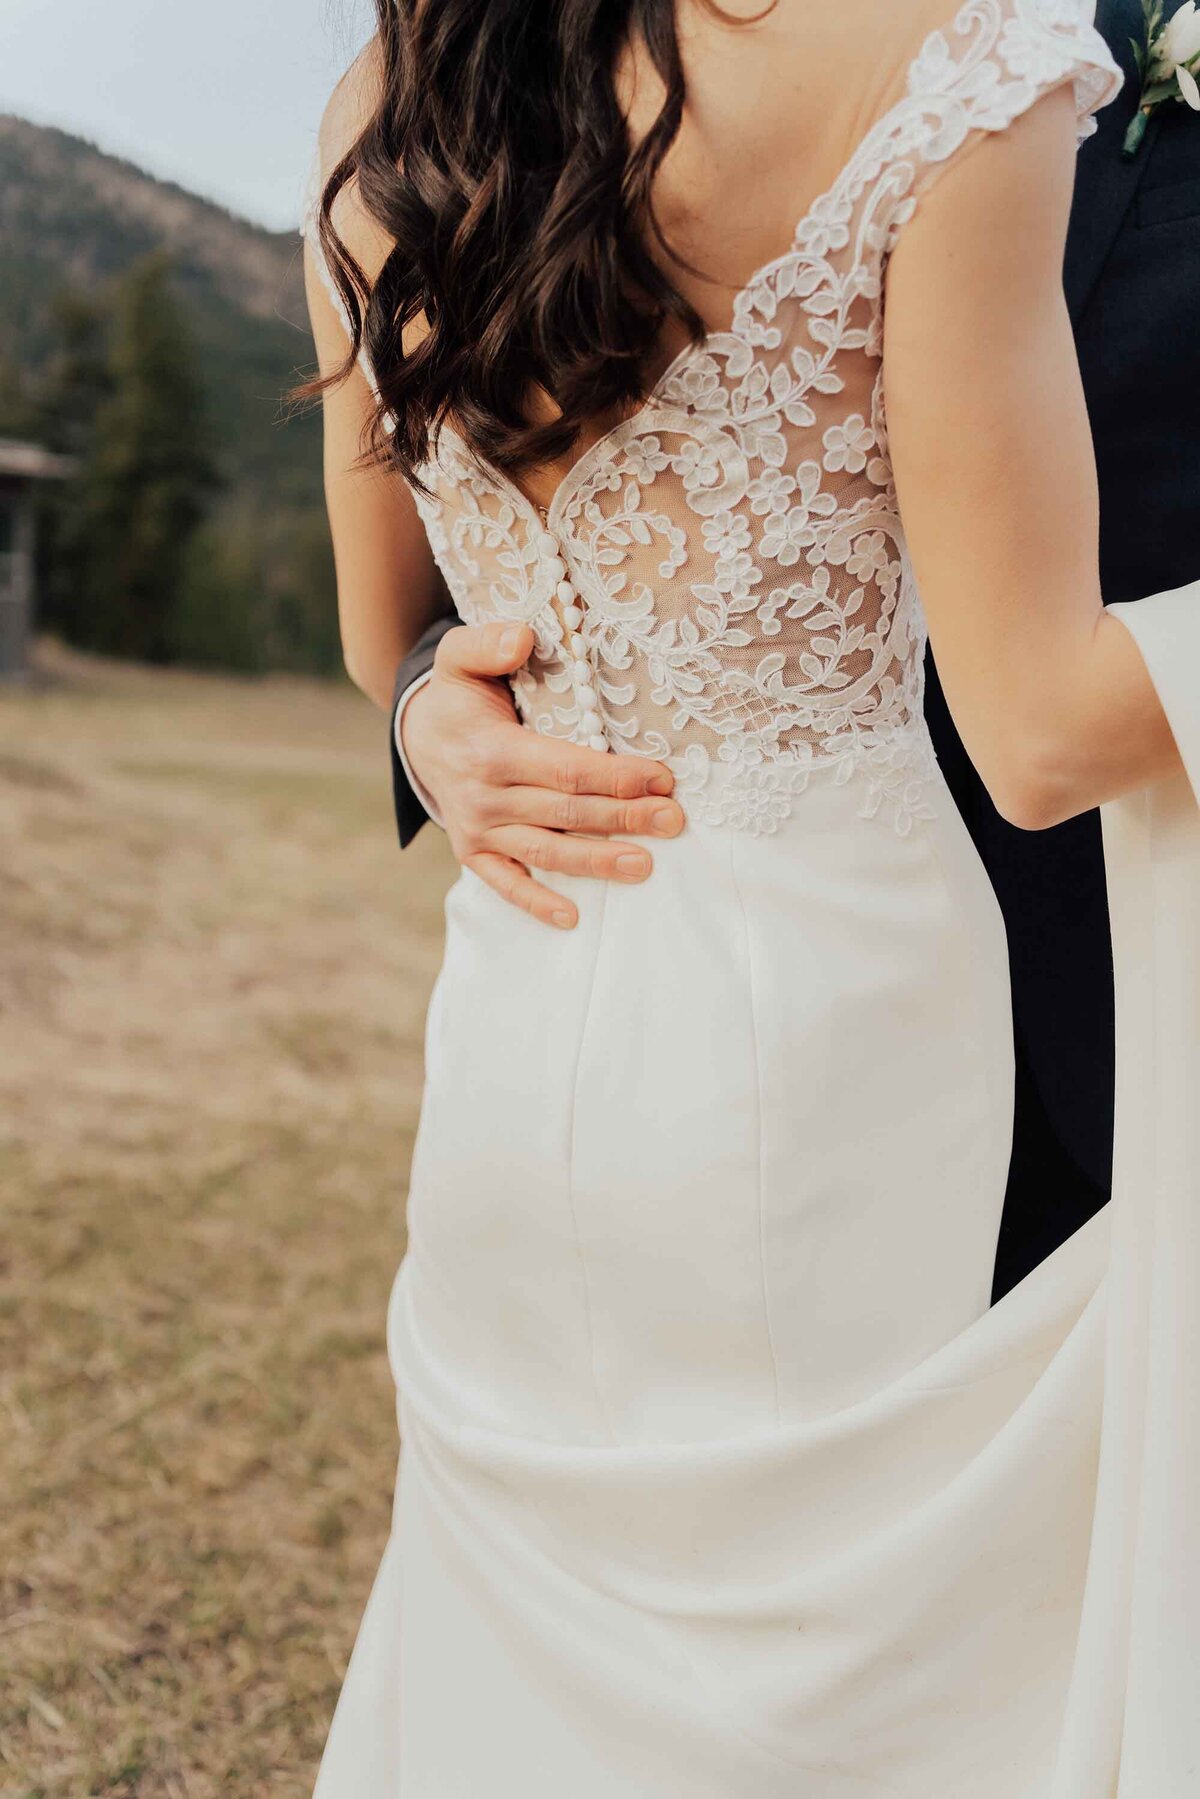 Maddie Rae Photography the back of the brides dress with the grooms hand wrapped around her waist as they dance. mountains in the background